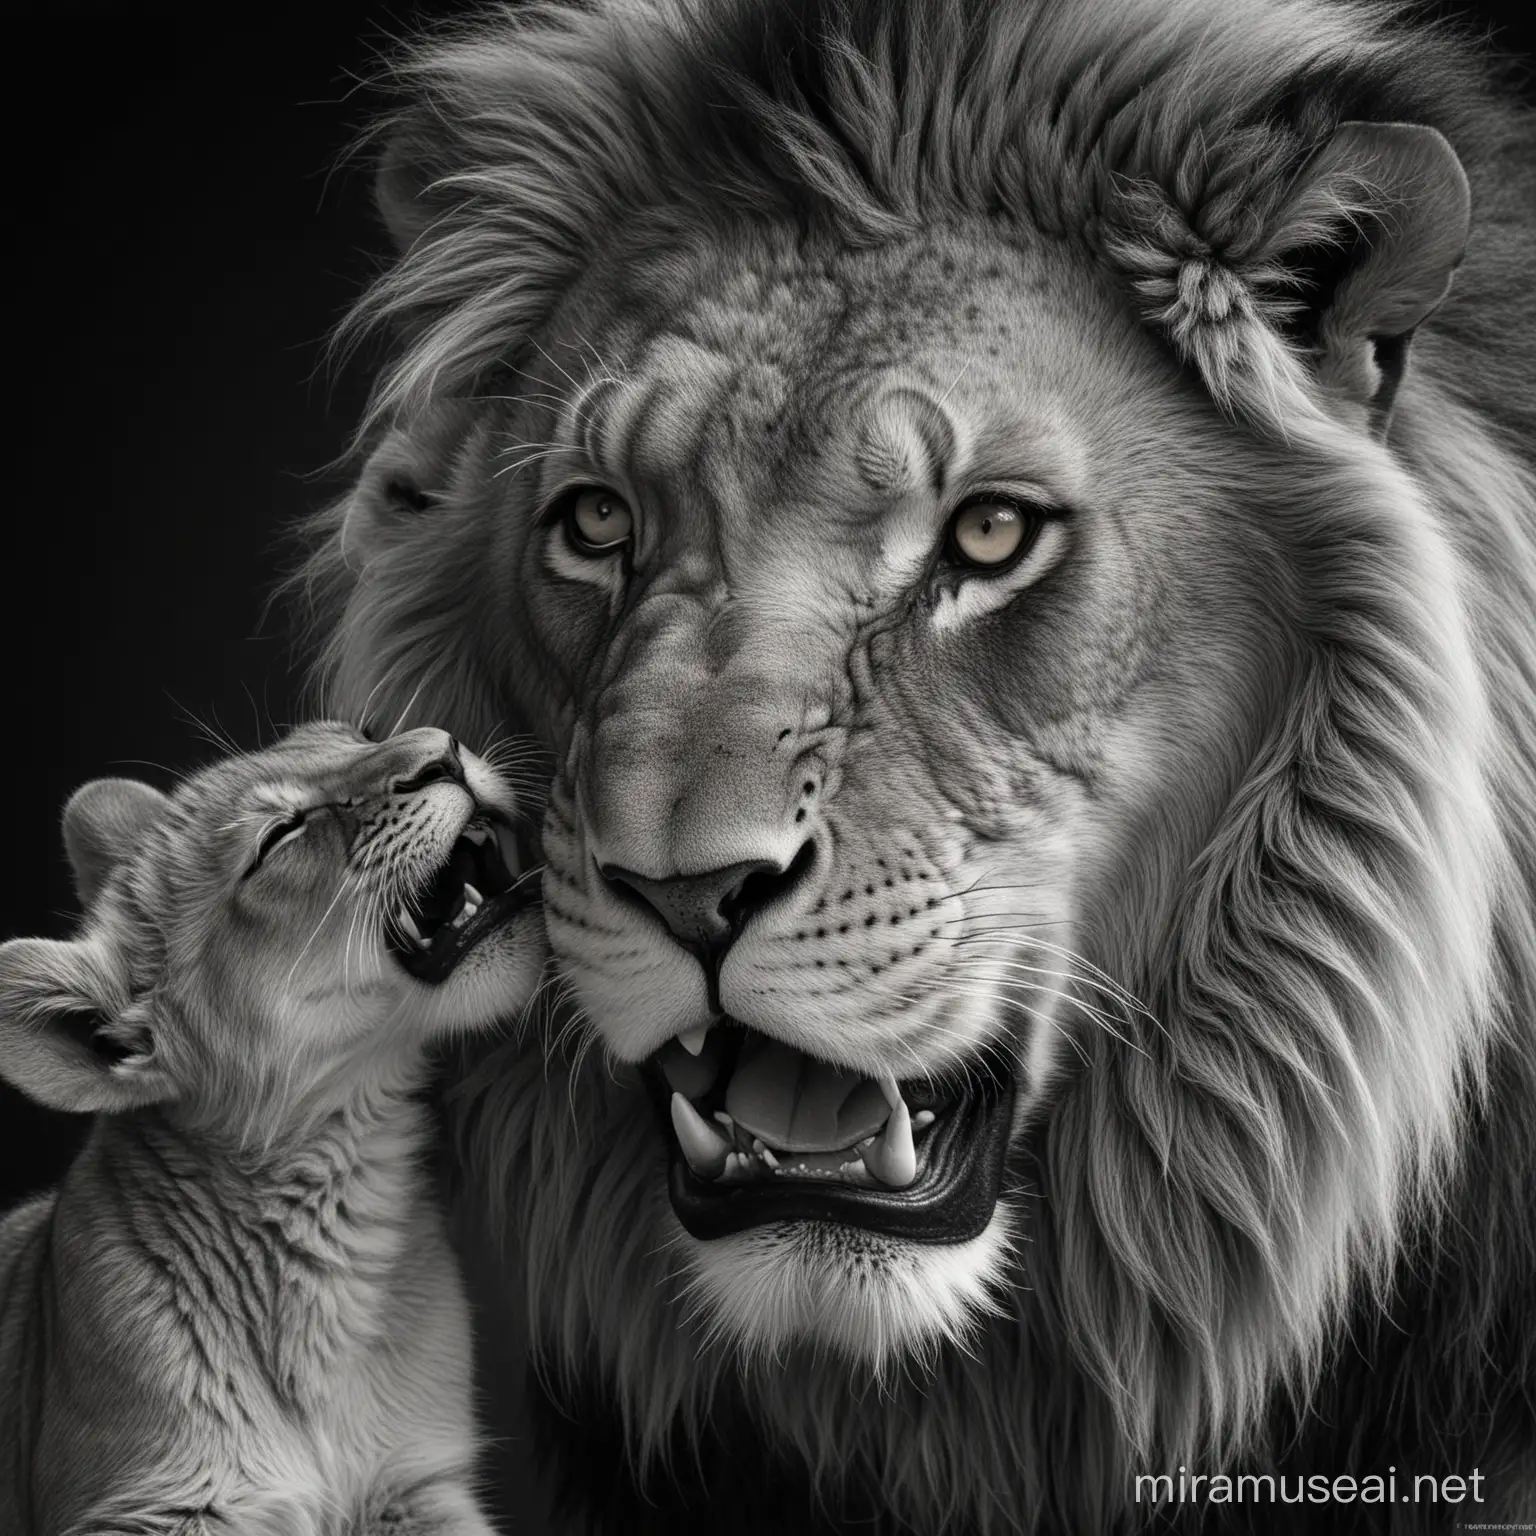 Lion Father Playfully Teasing Cub in Monochrome Portrait